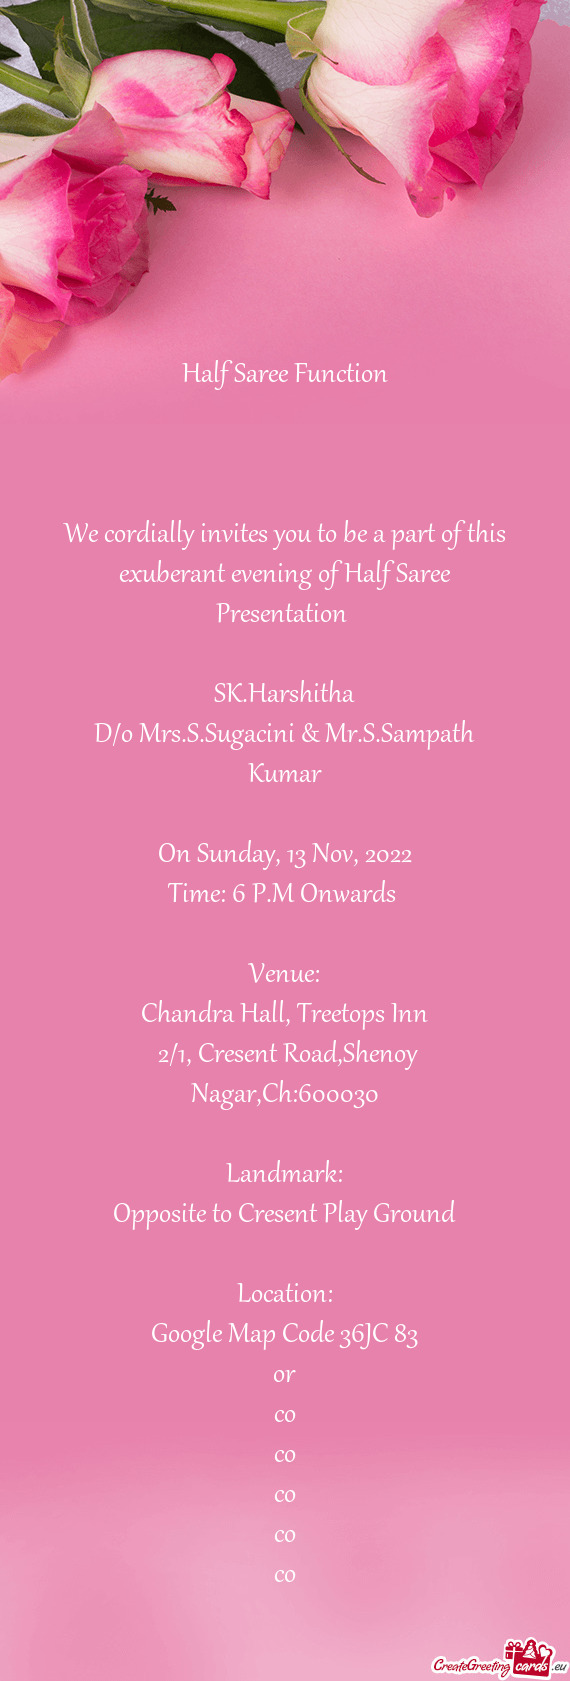 We cordially invites you to be a part of this exuberant evening of Half Saree Presentation